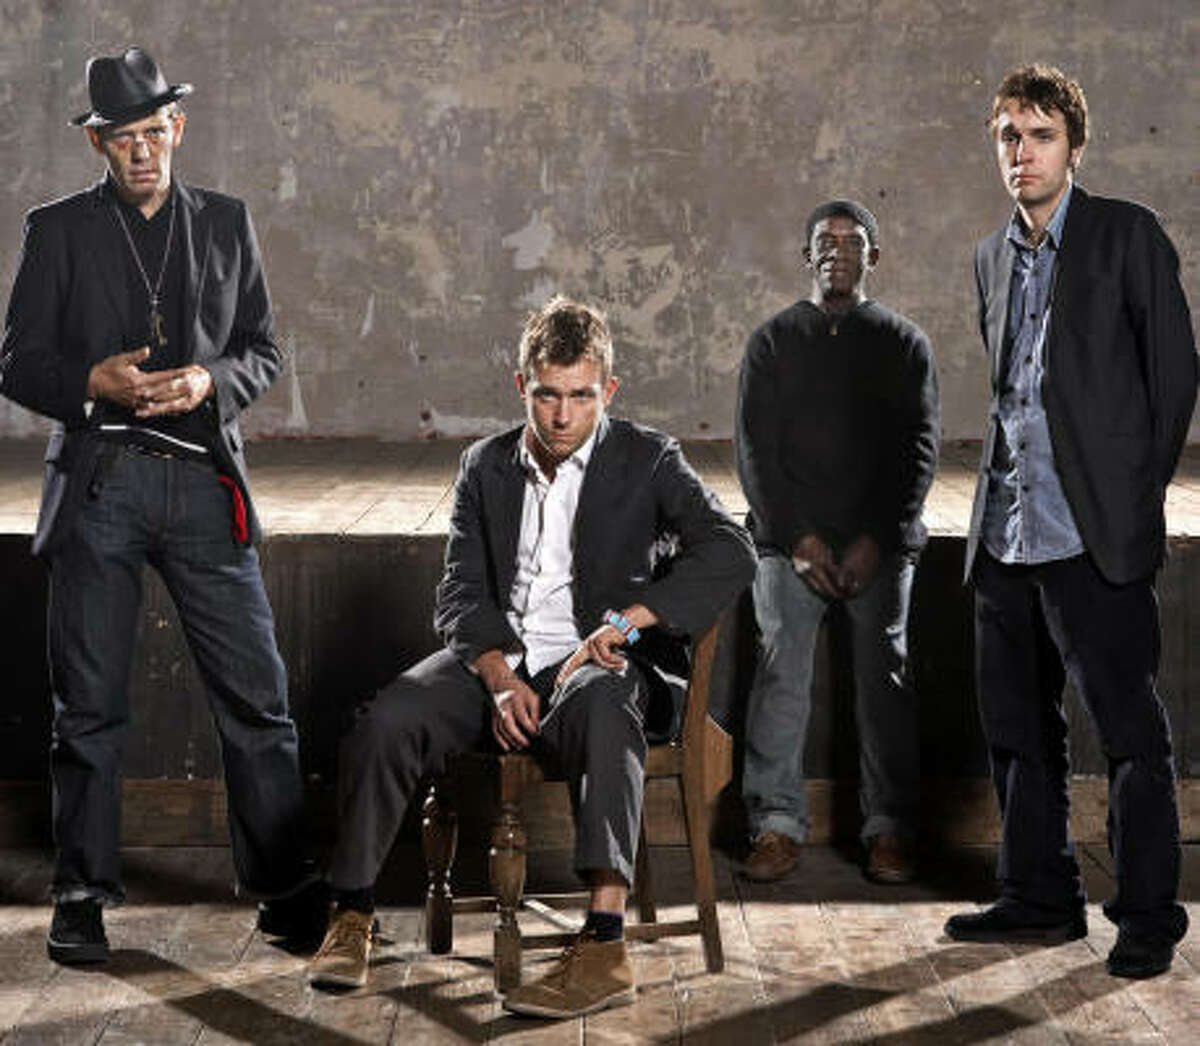 Damon Albarn indulges in quirky, worthwhile pursuits